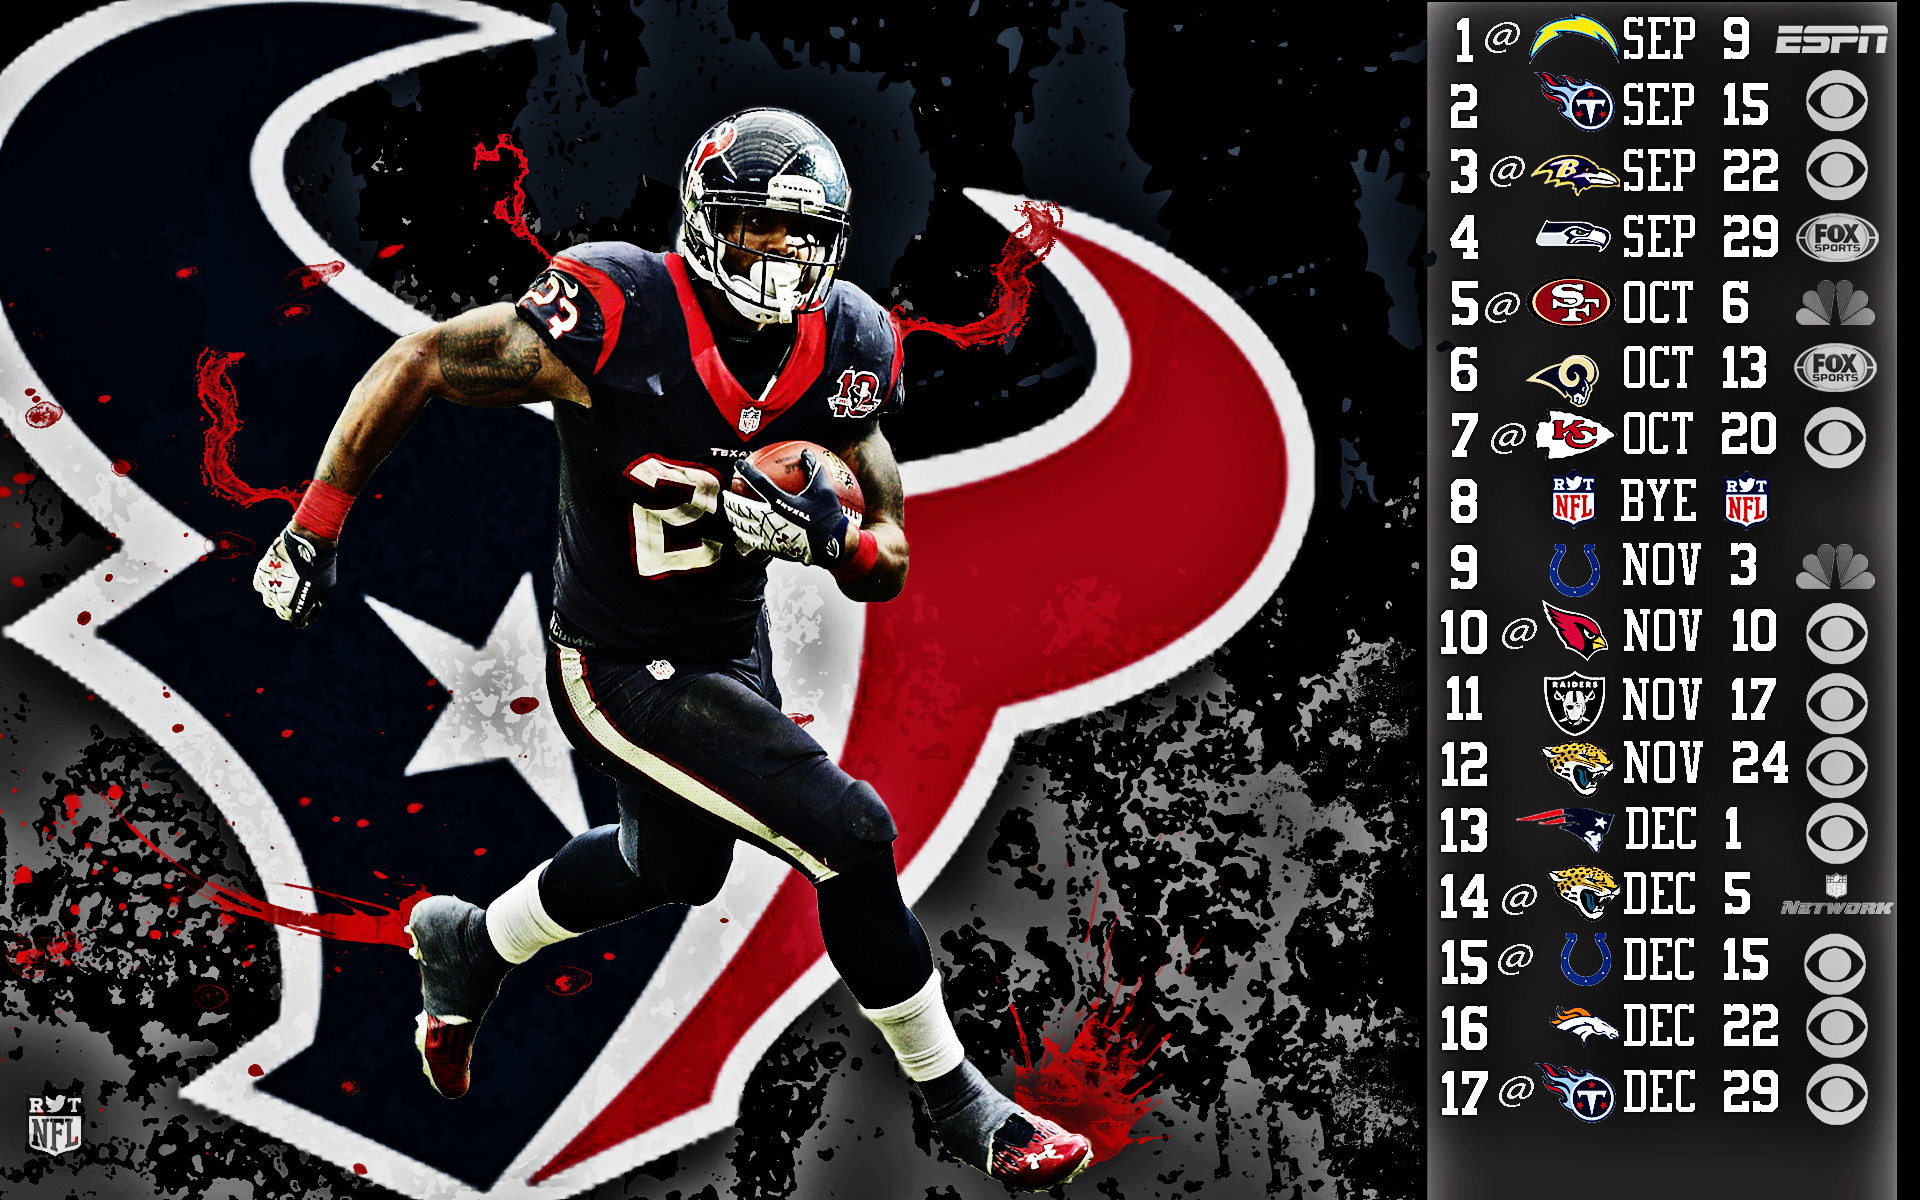 1920x1200 ... Arian Foster 2013 Schedule HDR ...